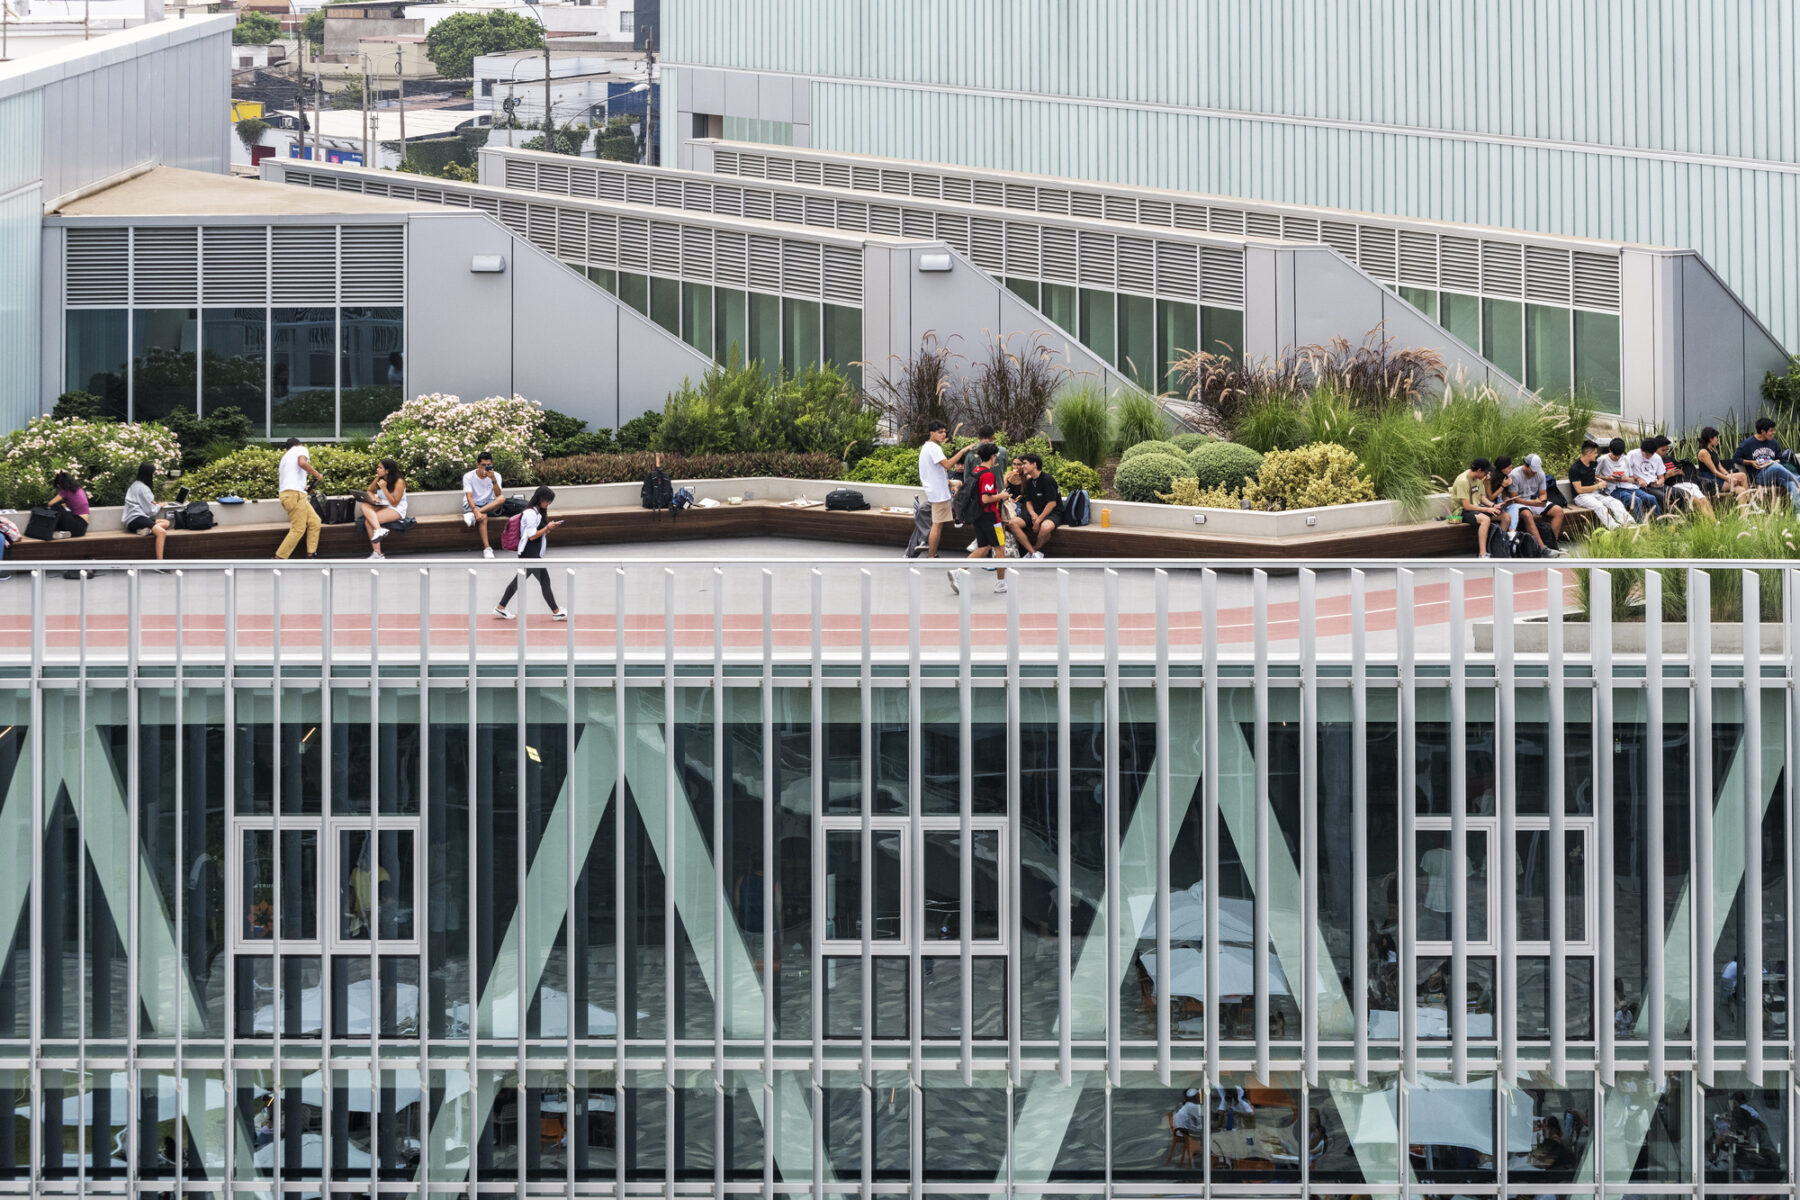 color aerial photo of students walking on an outdoor track on the rooftop of the Wellness Center. Vegetation lines the track and skylights take up the interior of the roof.